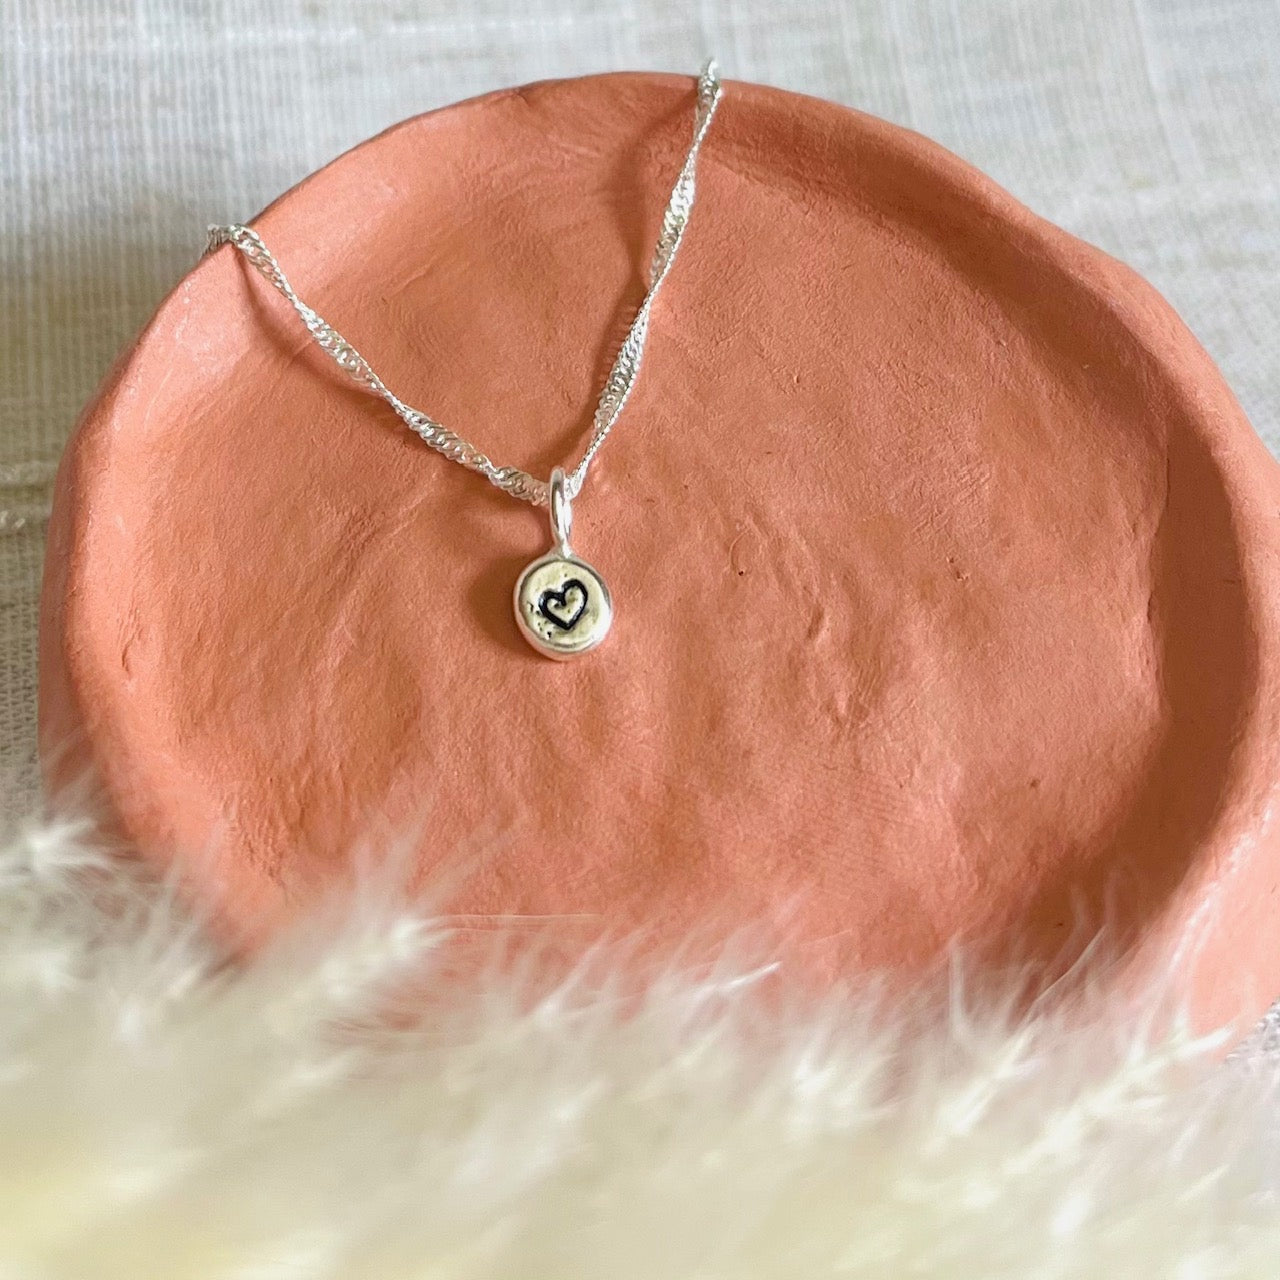 Belly Button Necklace- Umbilical Cord Keepsake